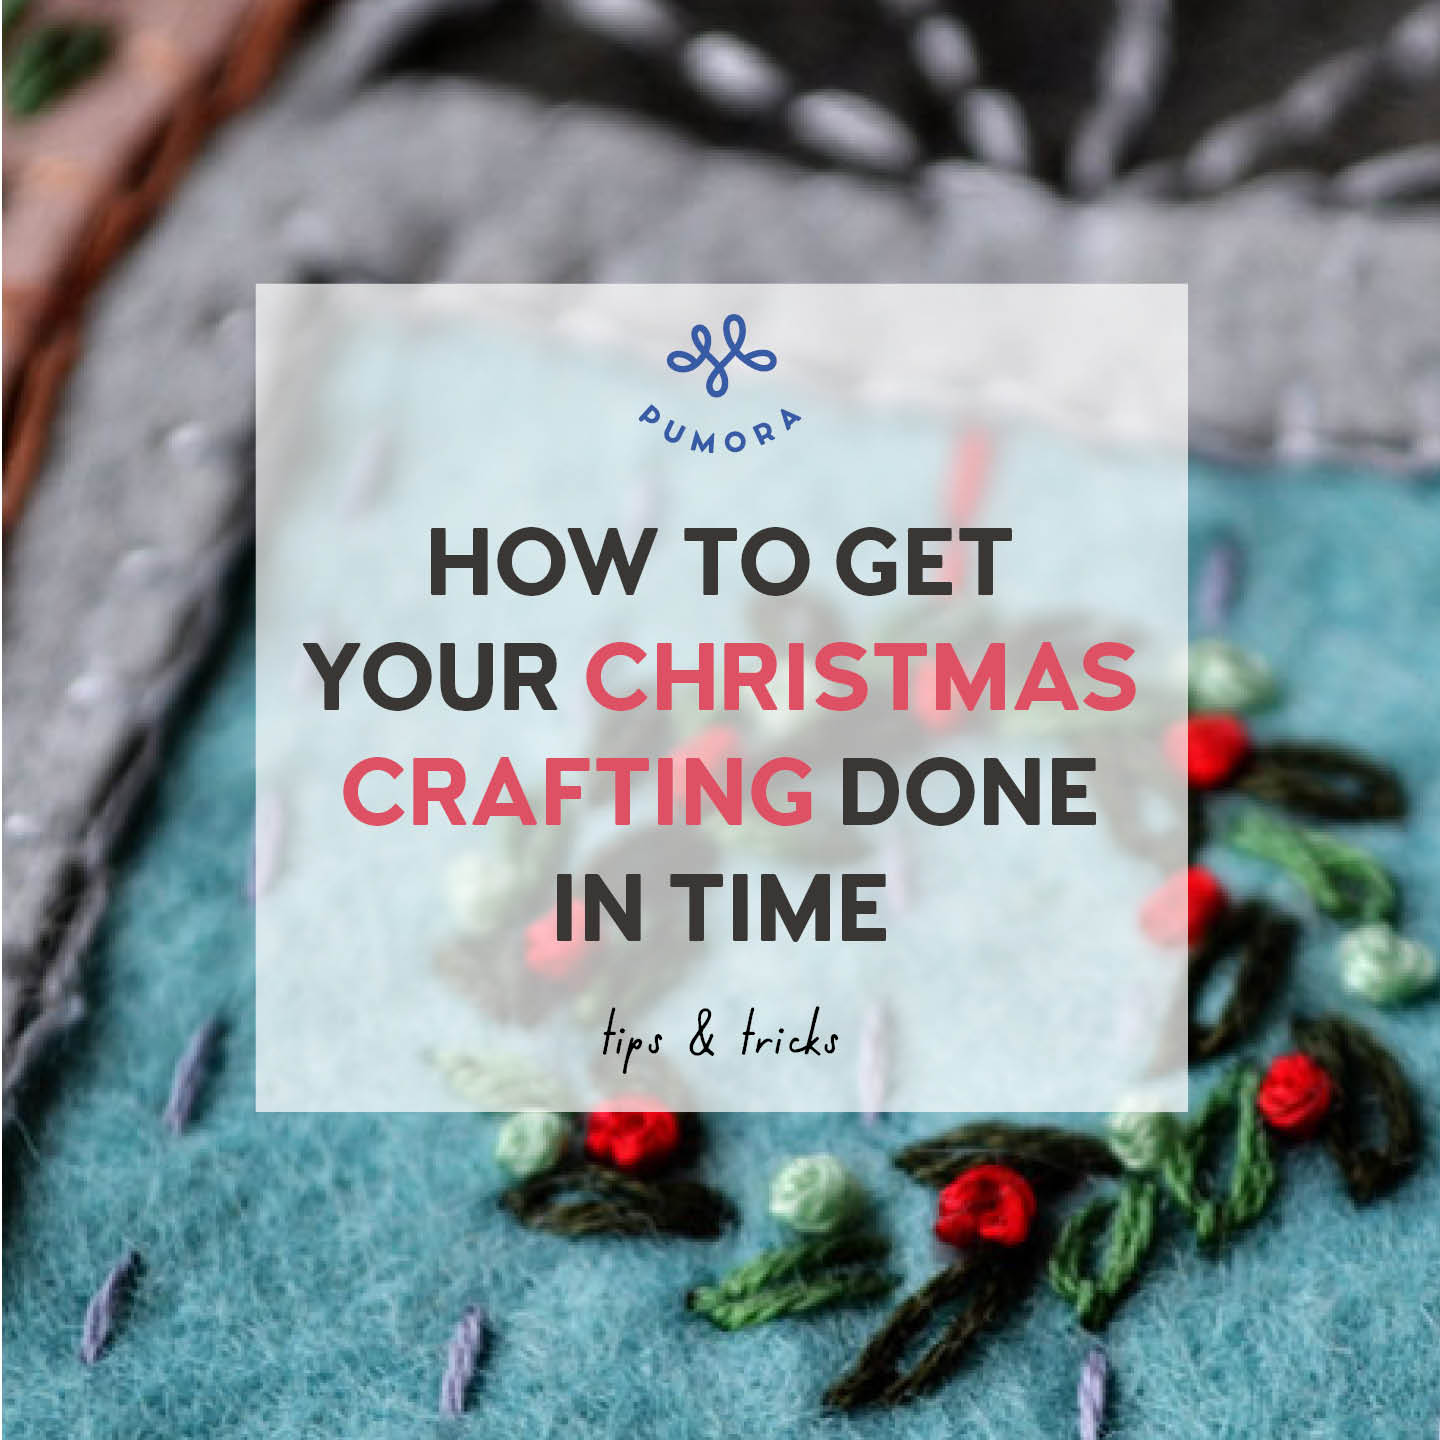 How to get your Christmas crafting done in time